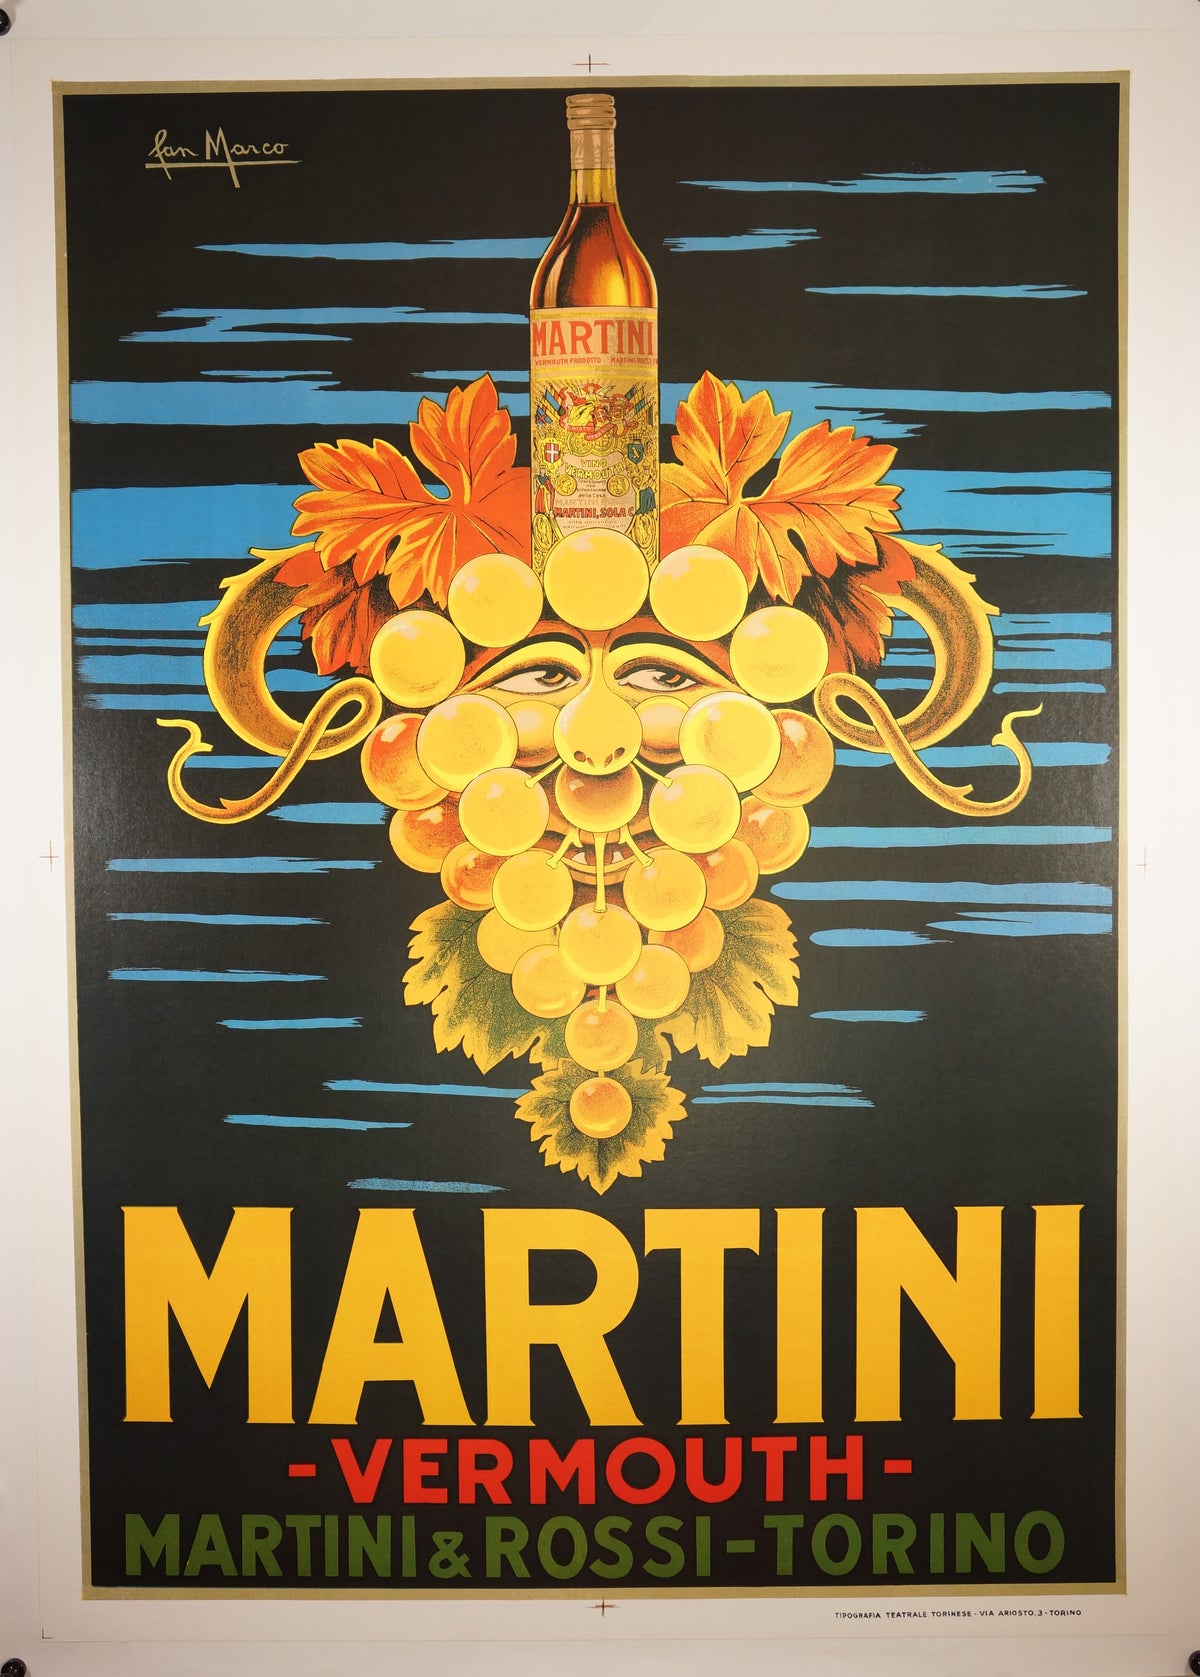 Martini Vermouth - Authentic Vintage Poster